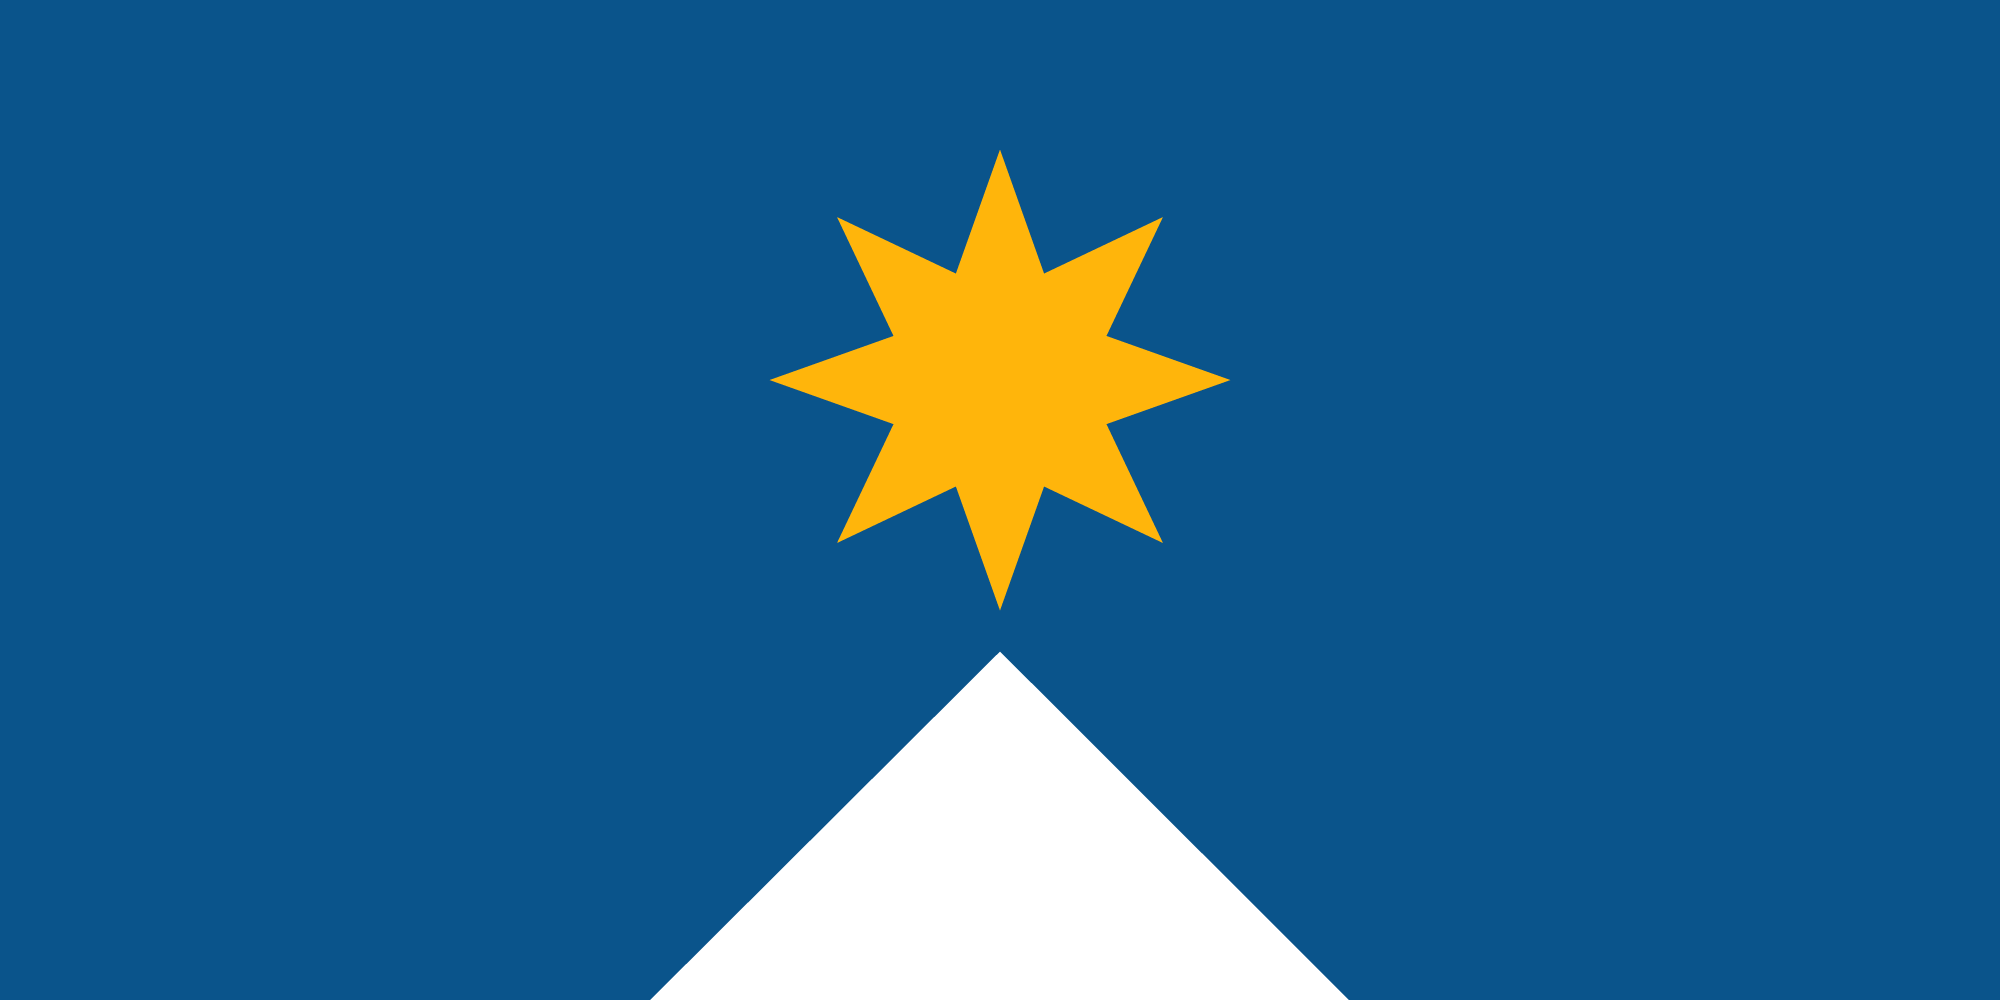 A state flag proposal for ACT